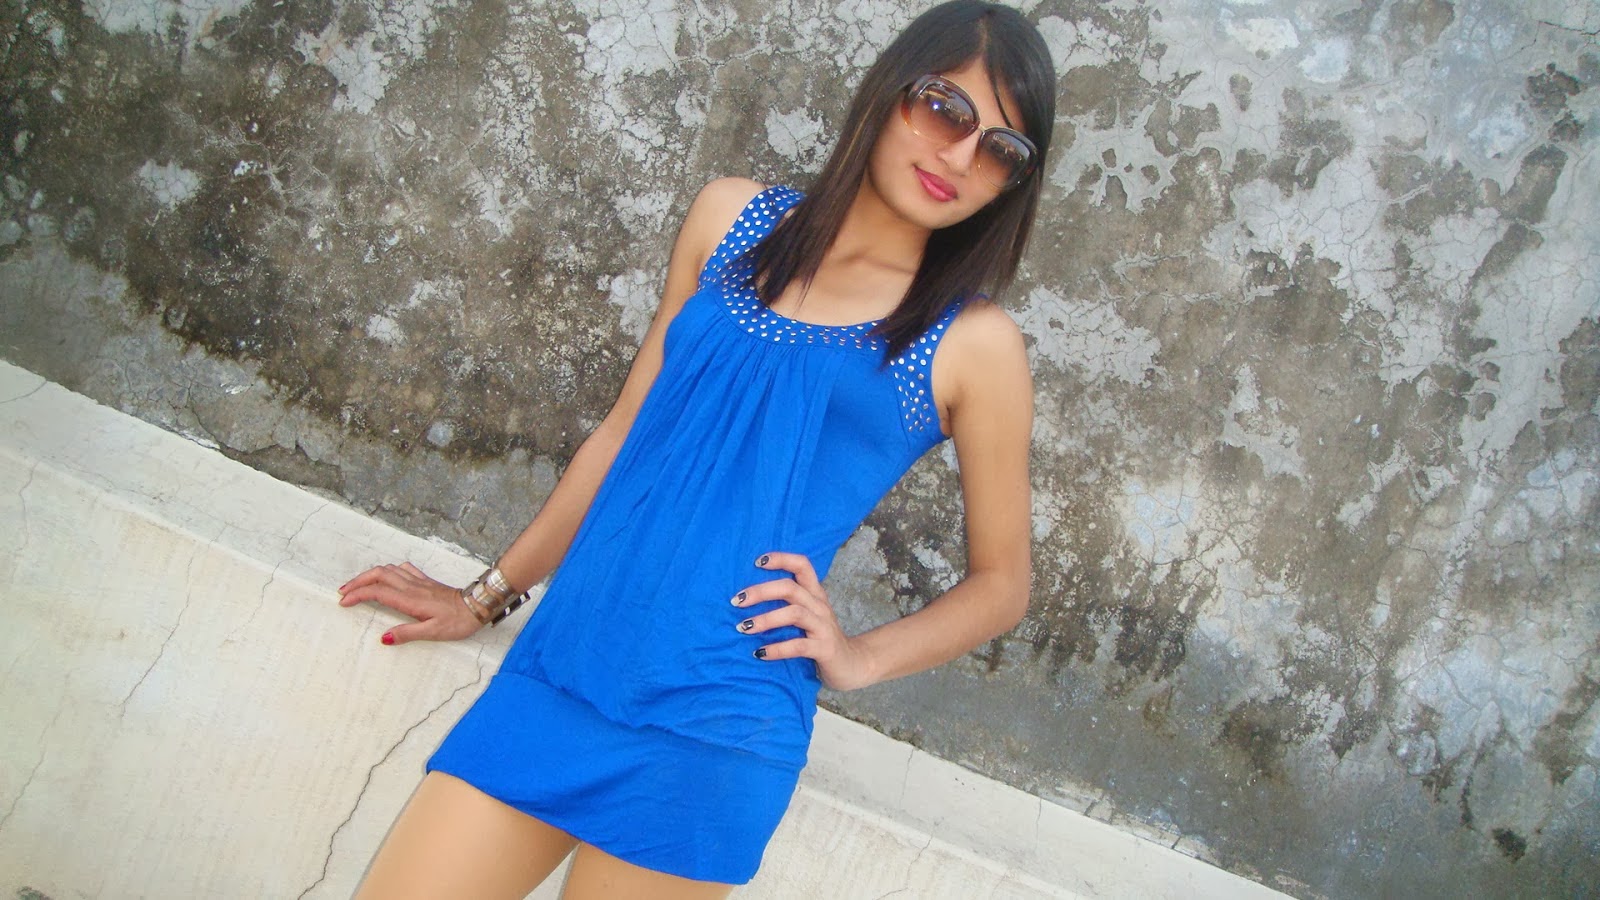 Nepal Girls Photos Hot Desi Girls Pictures And Wallpapers